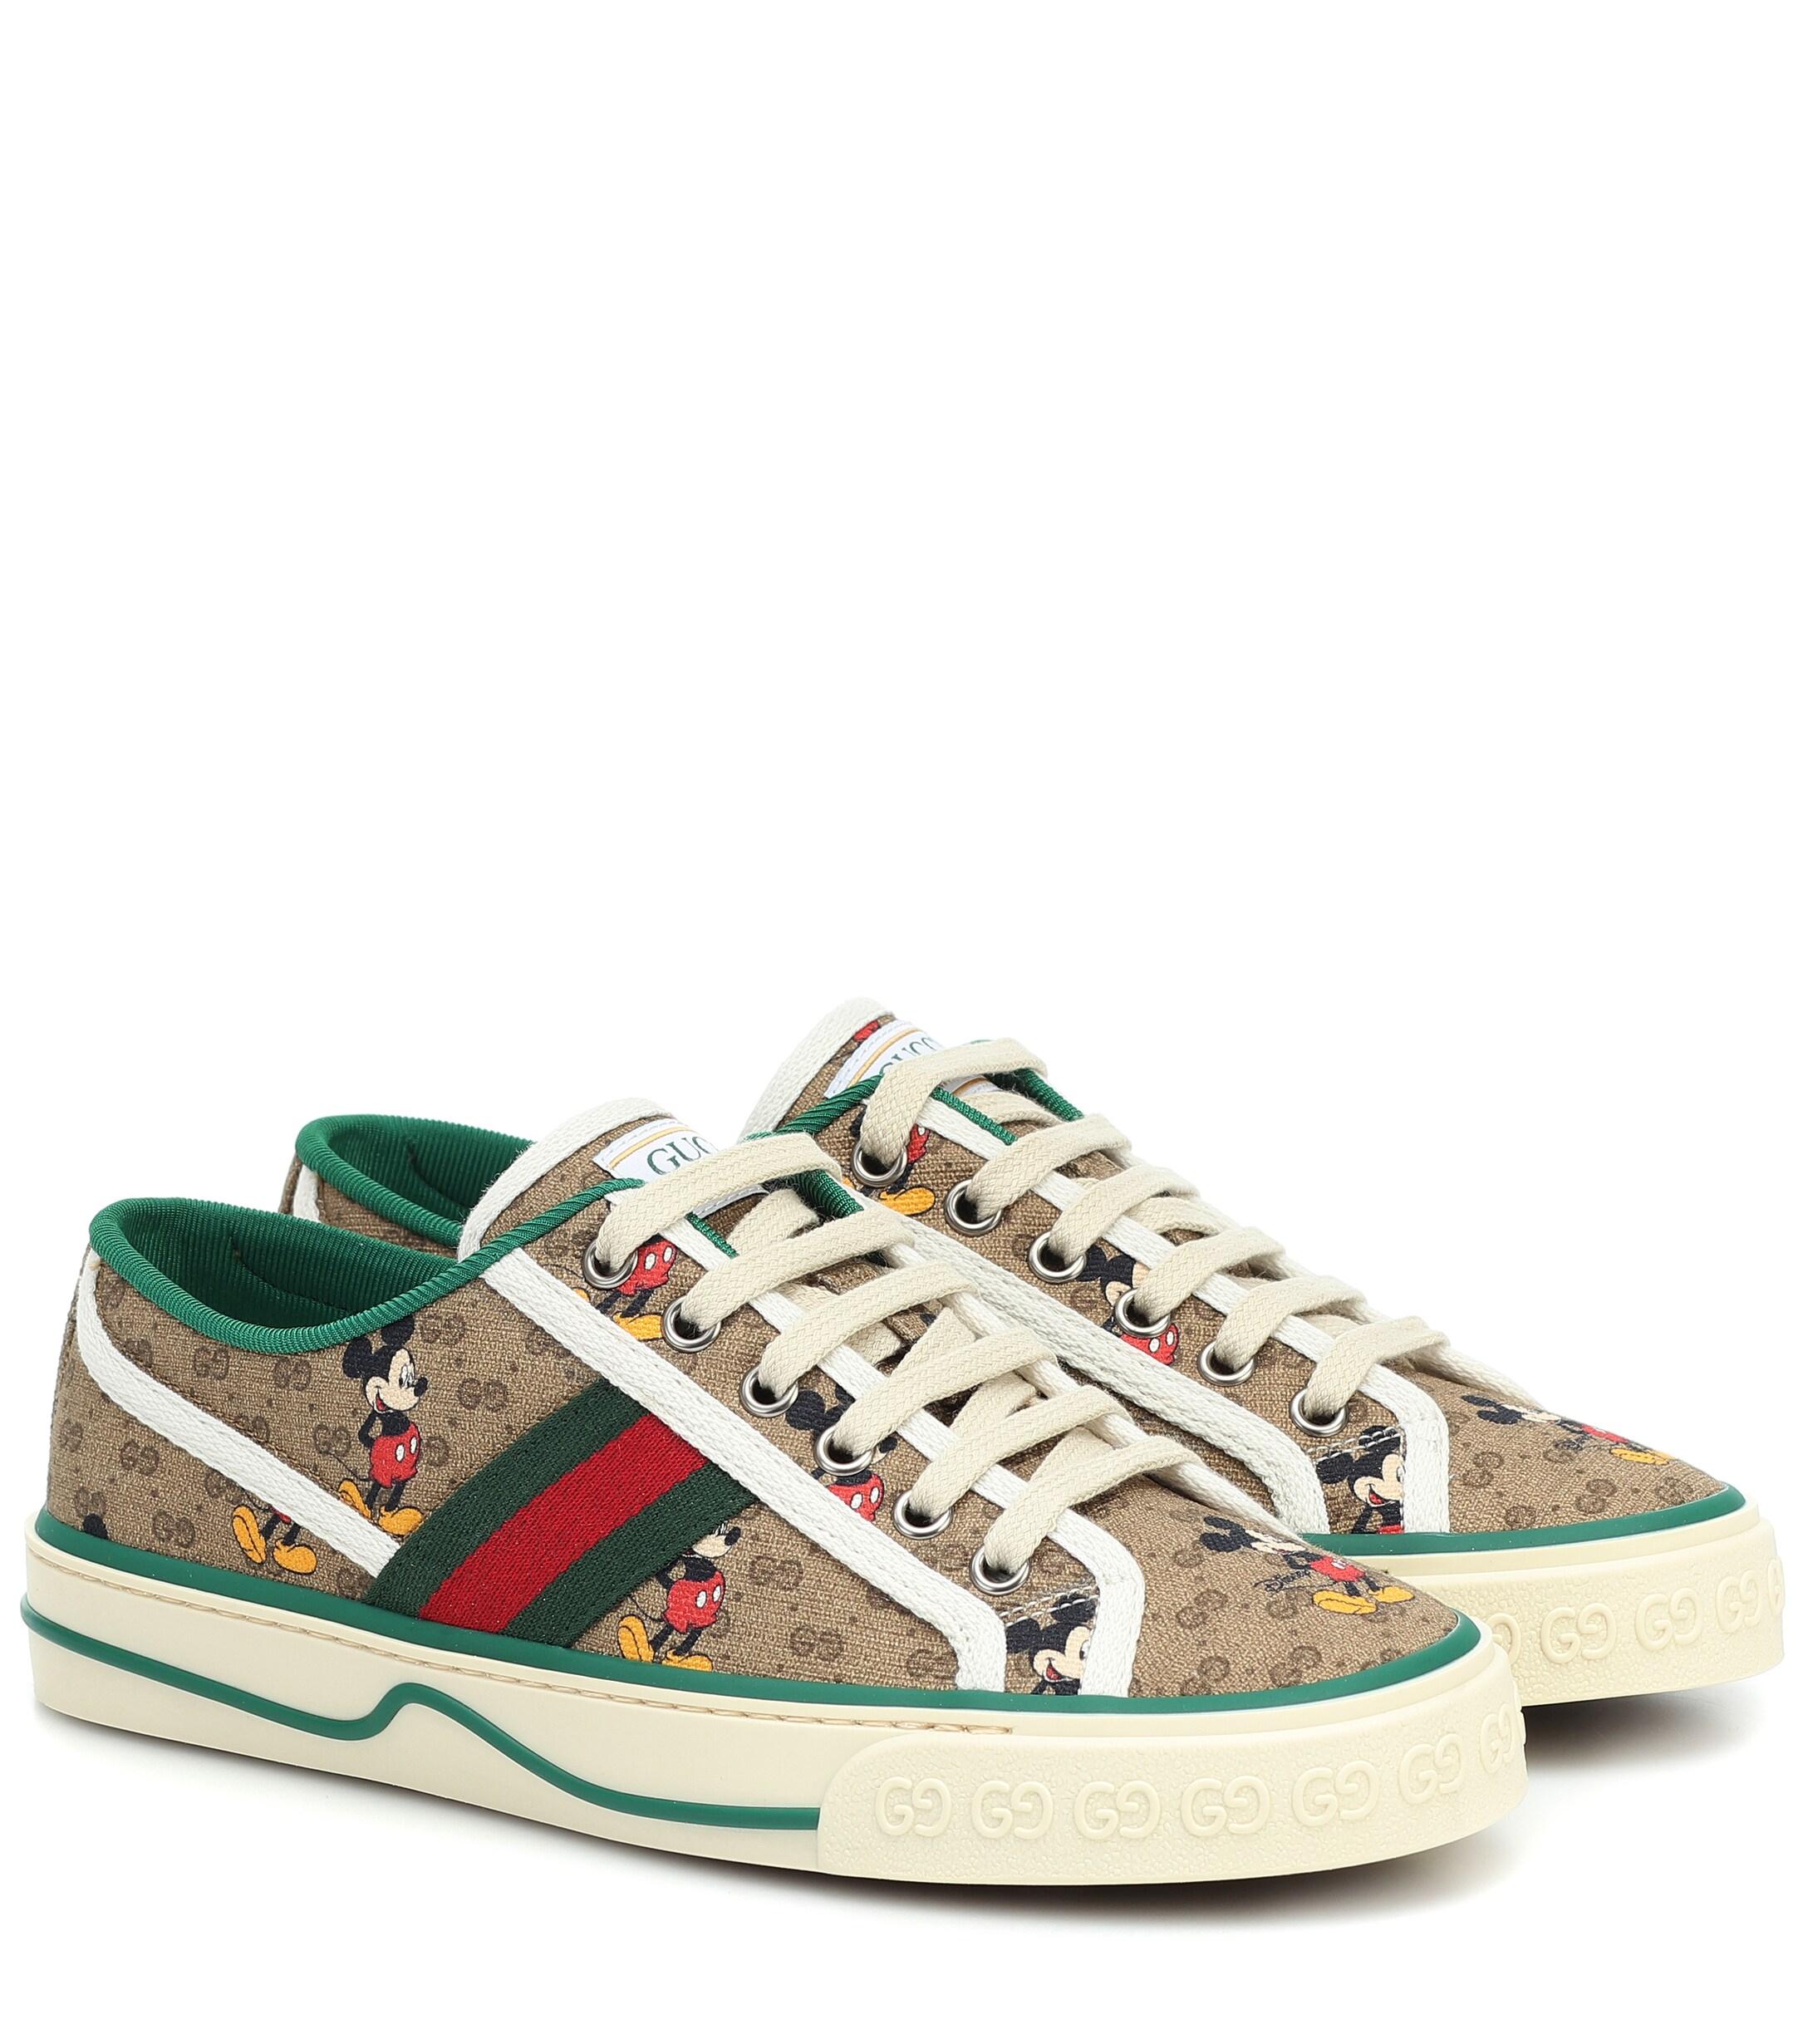 Gucci + Disney Printed Canvas Sneakers in Brown Save 18